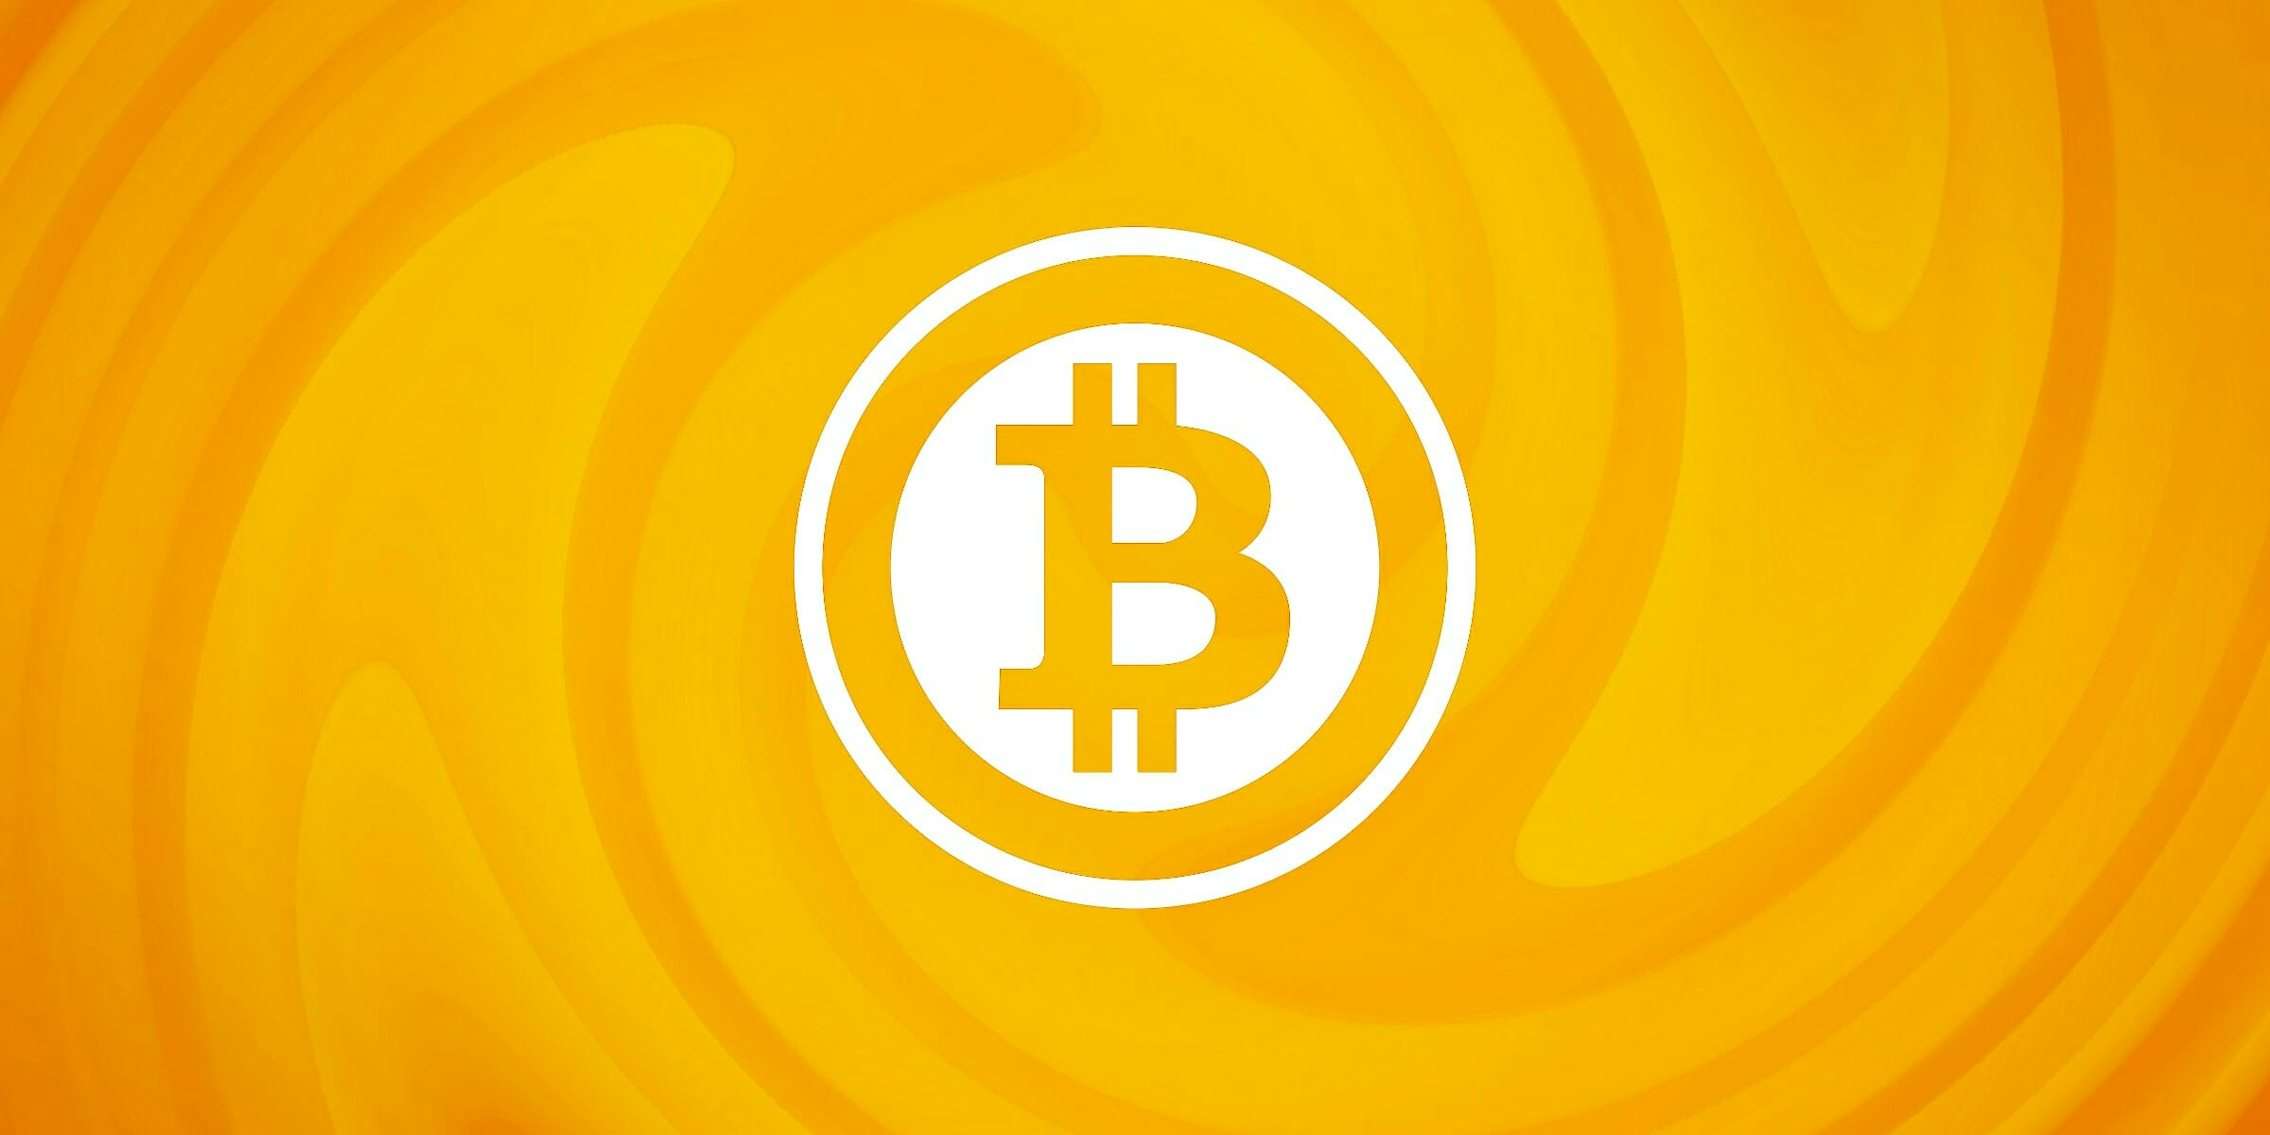 Ohio business owners will soon be able to pay their taxes with Bitcoin, a new report reveals.